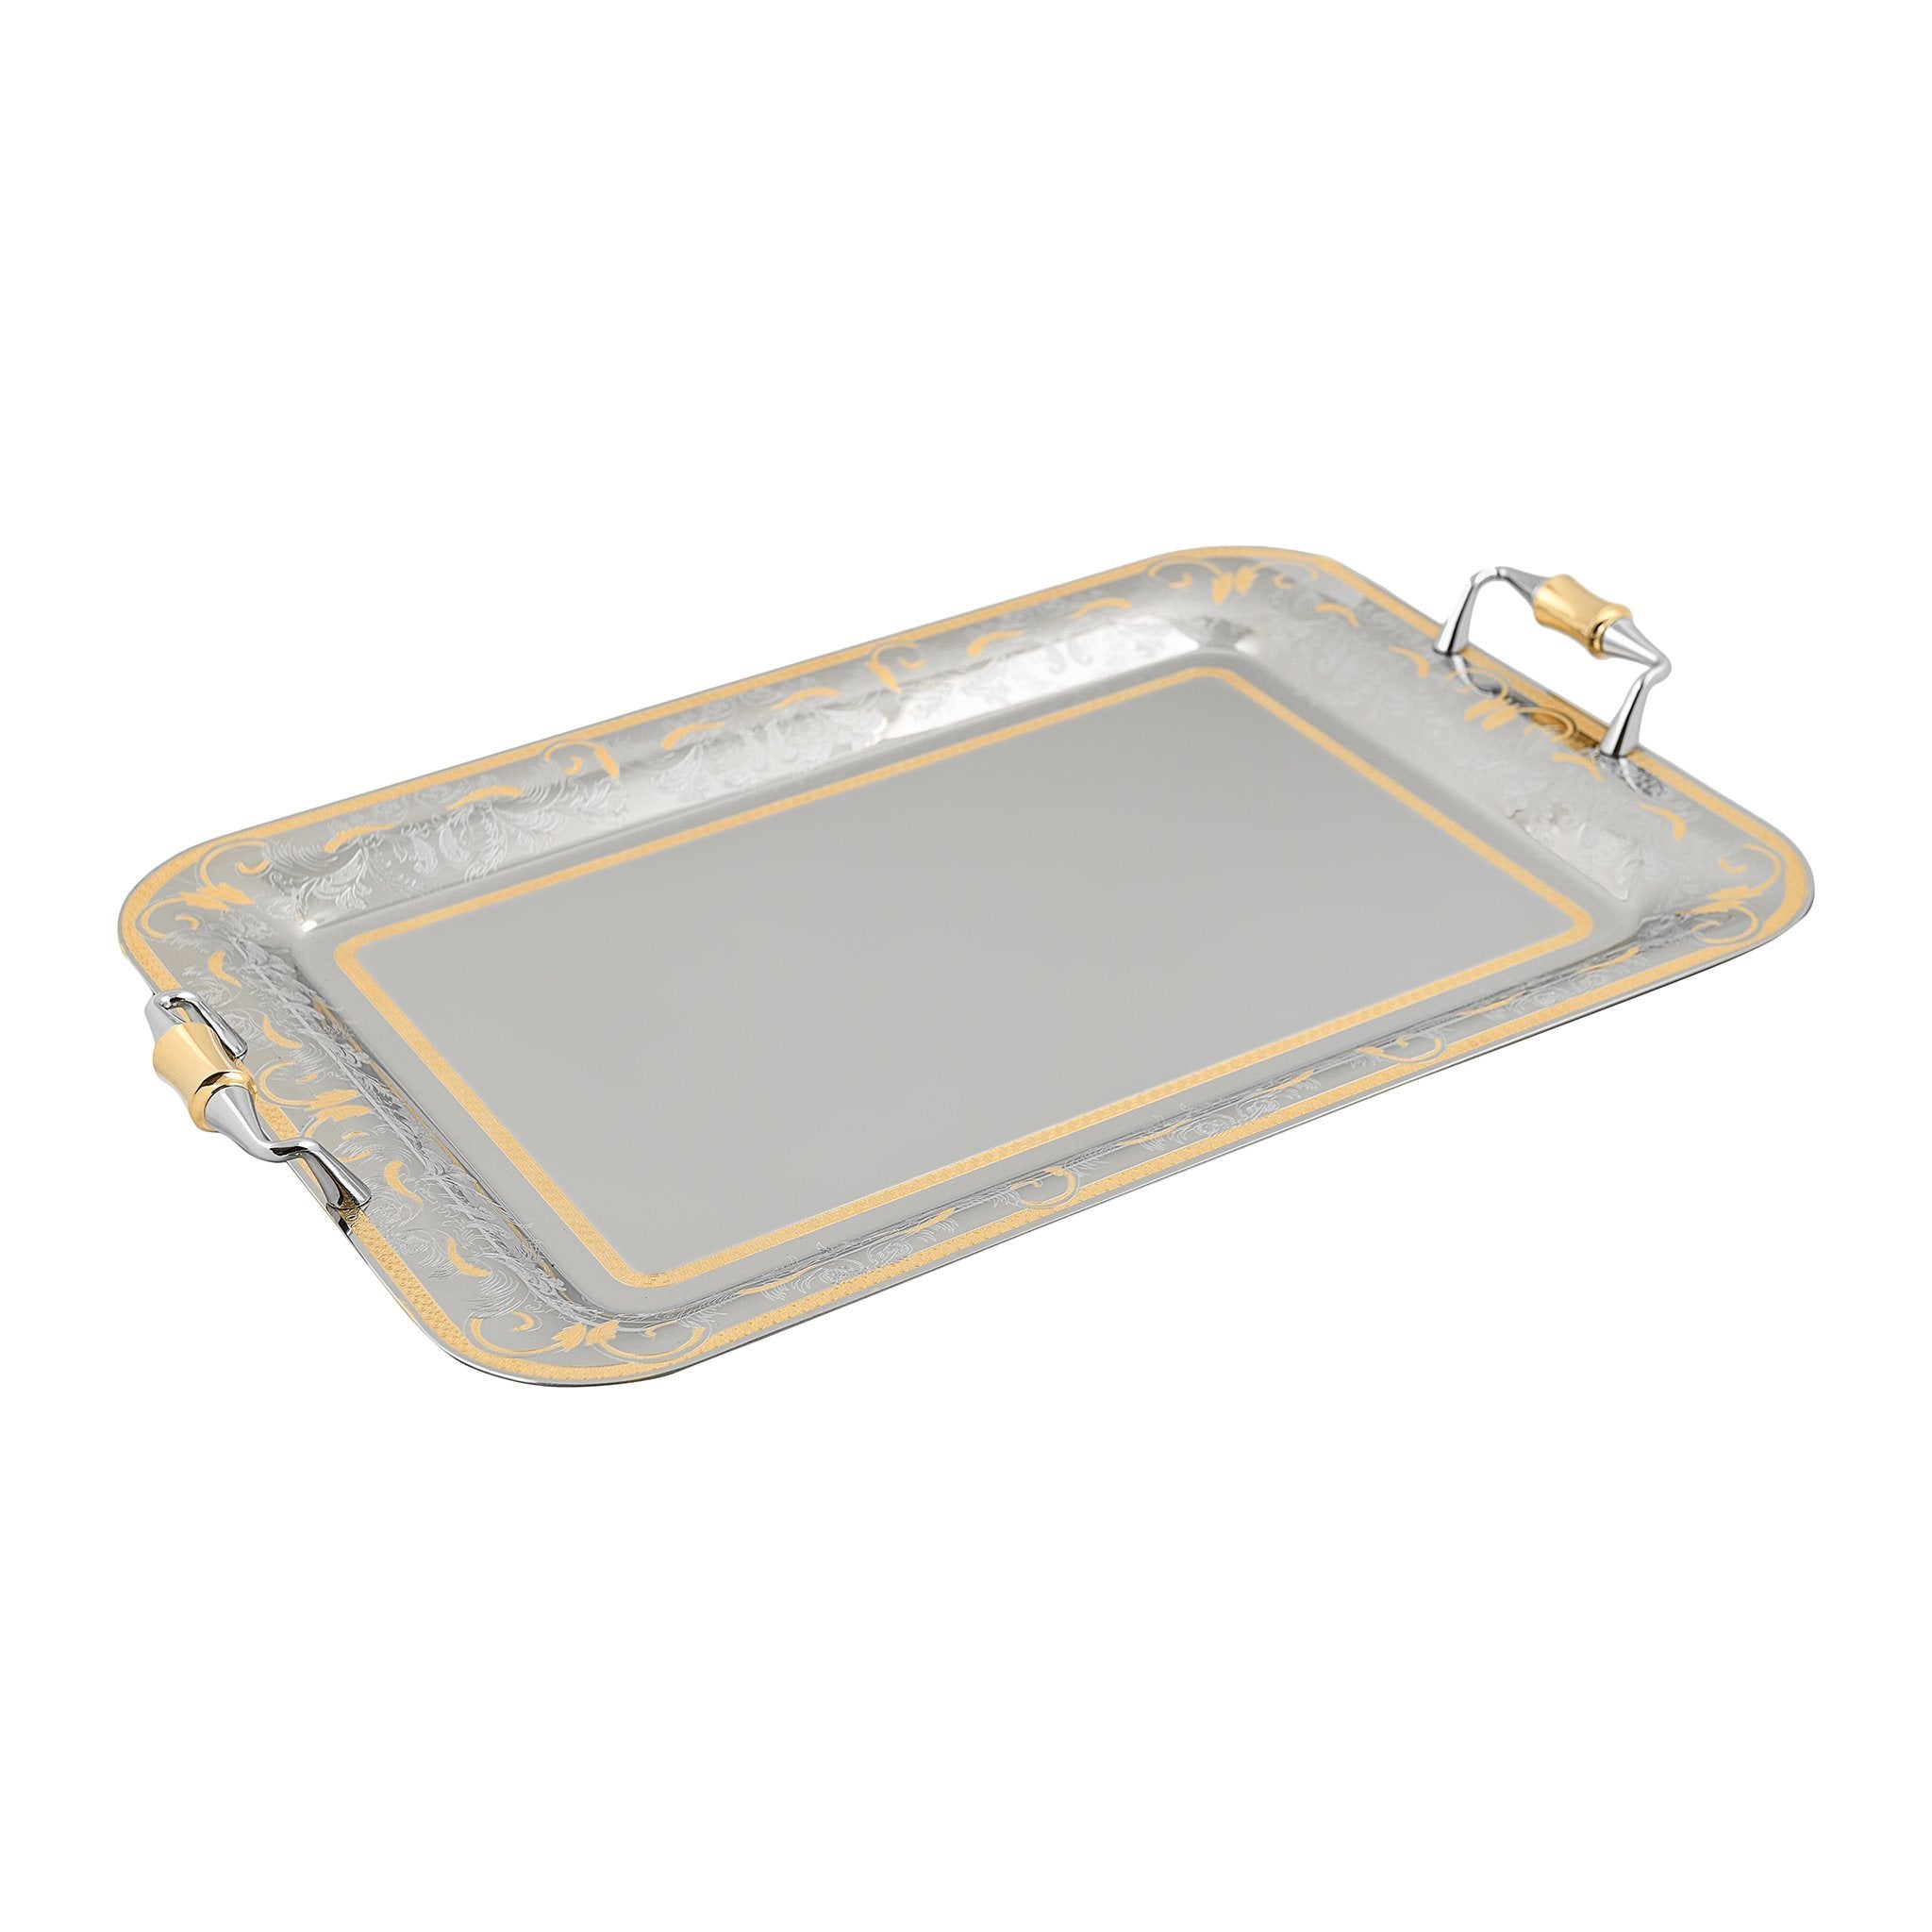 Elegant Gioiel - Rectangular Tray with Handles - Gold - Stainless Steel 18/10 - 50x36cm - 75000188